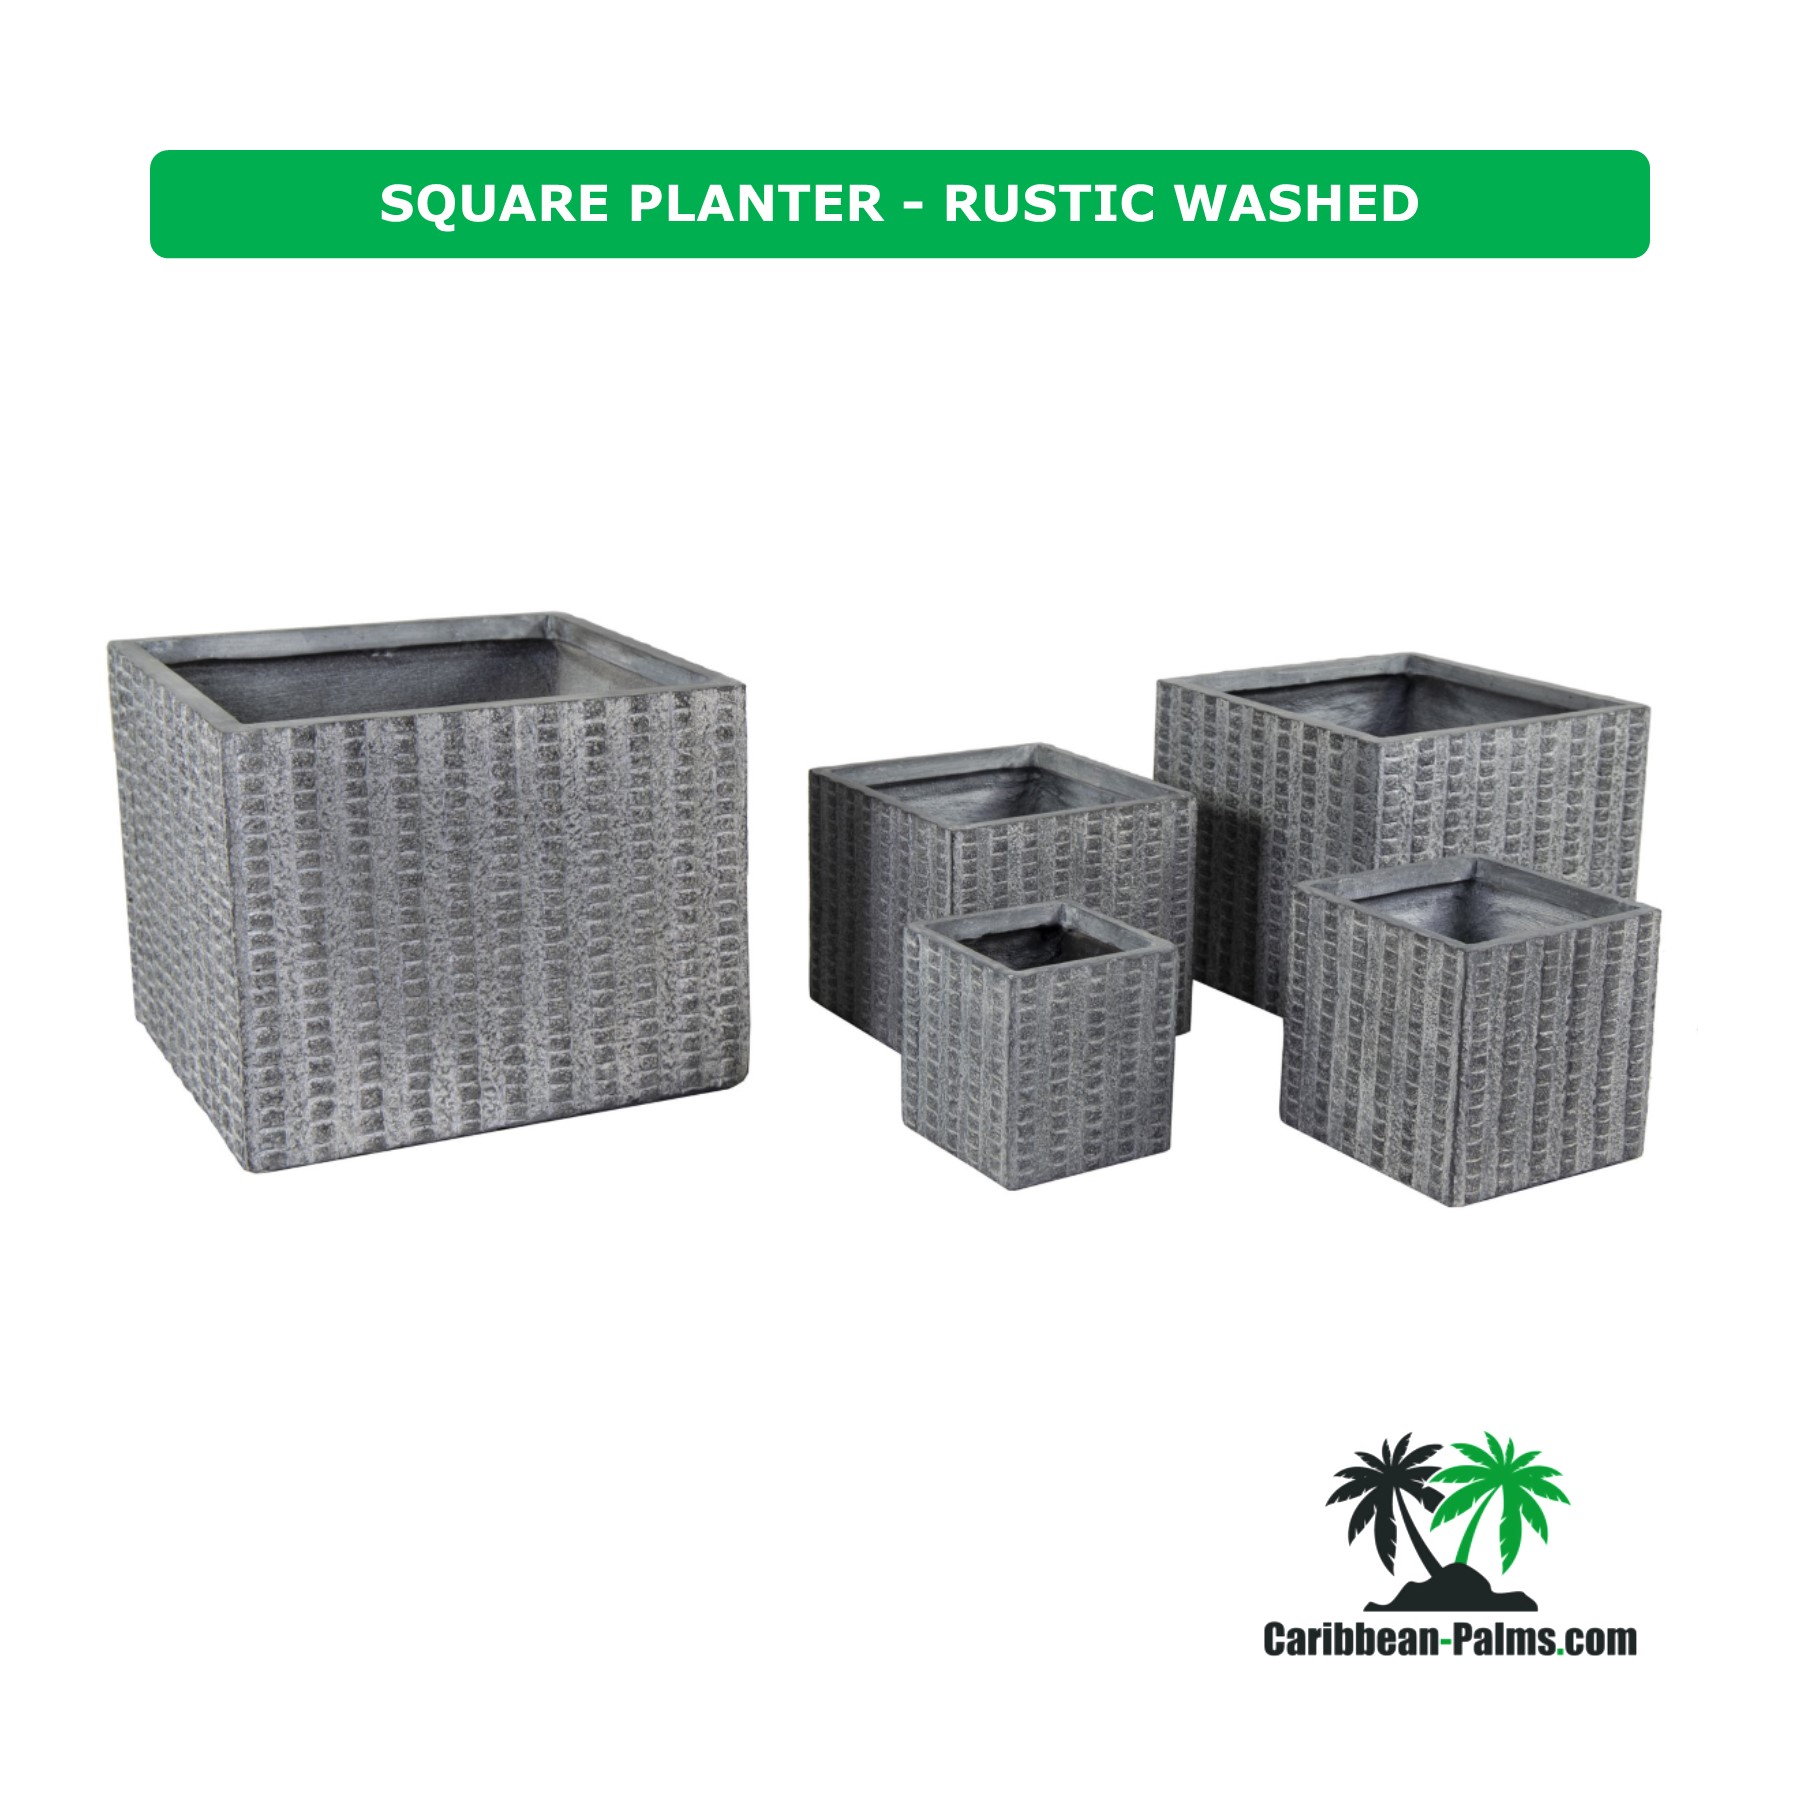 SQUARE PLANTER RUSTIC WASHED